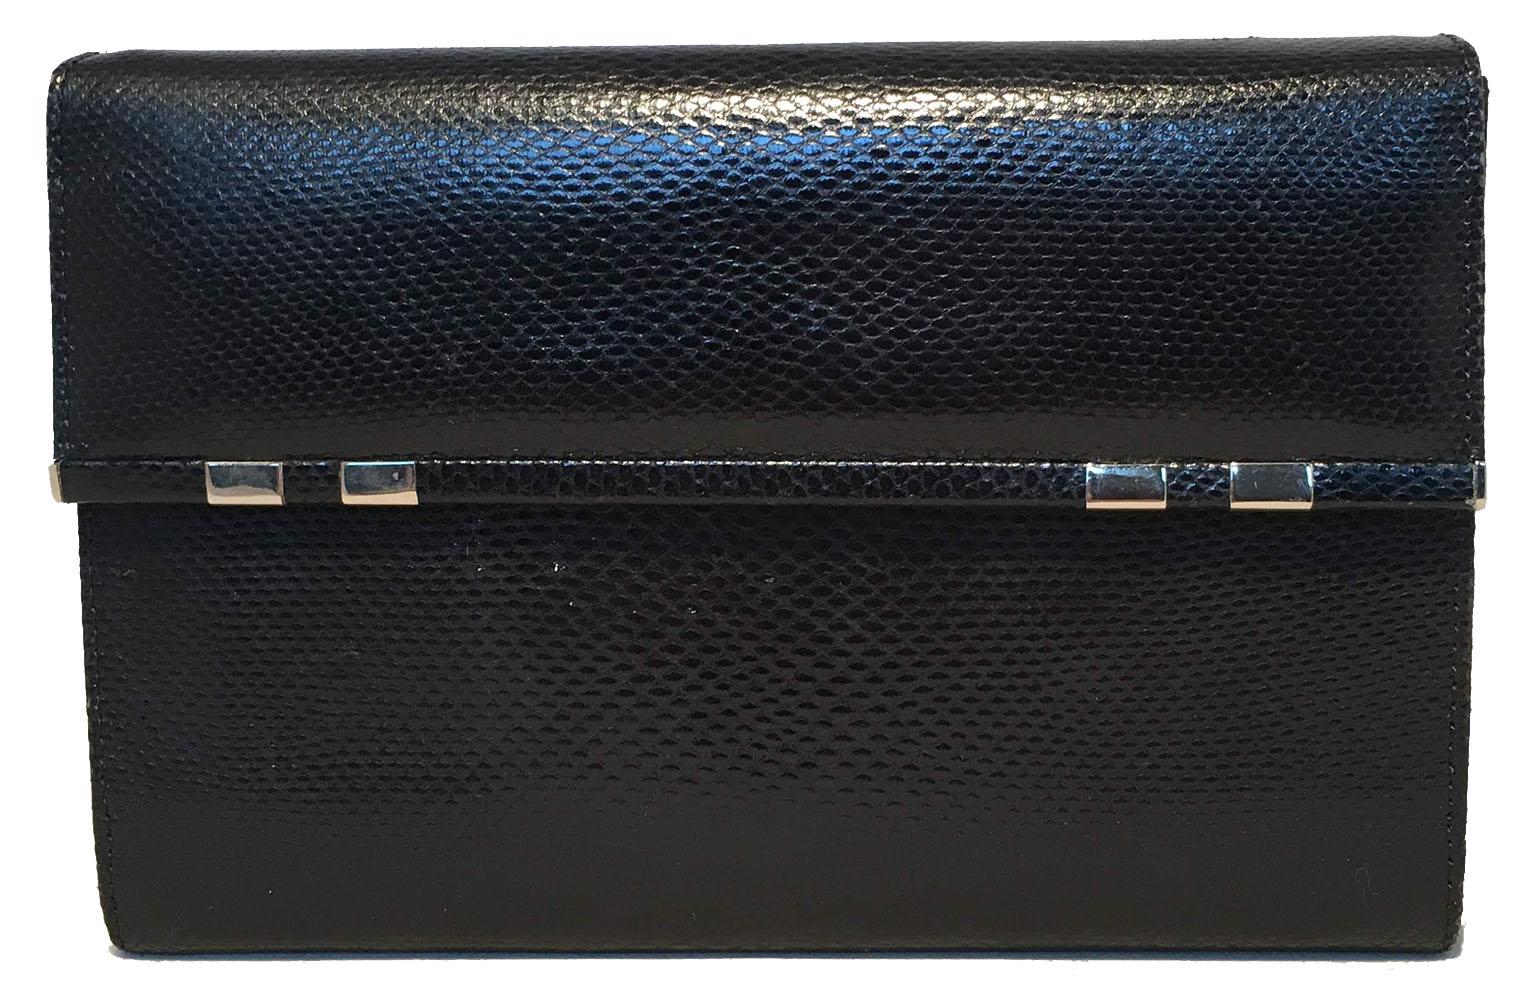 FABULOUS Judith Leiber Black Lizard Wallet Wristlet Clutch in excellent condition. Black lizard leather exterior trimmed with silver hardware and a removable strap. Double magnetic snap closure opens to a pink leather lined interior that holds 9